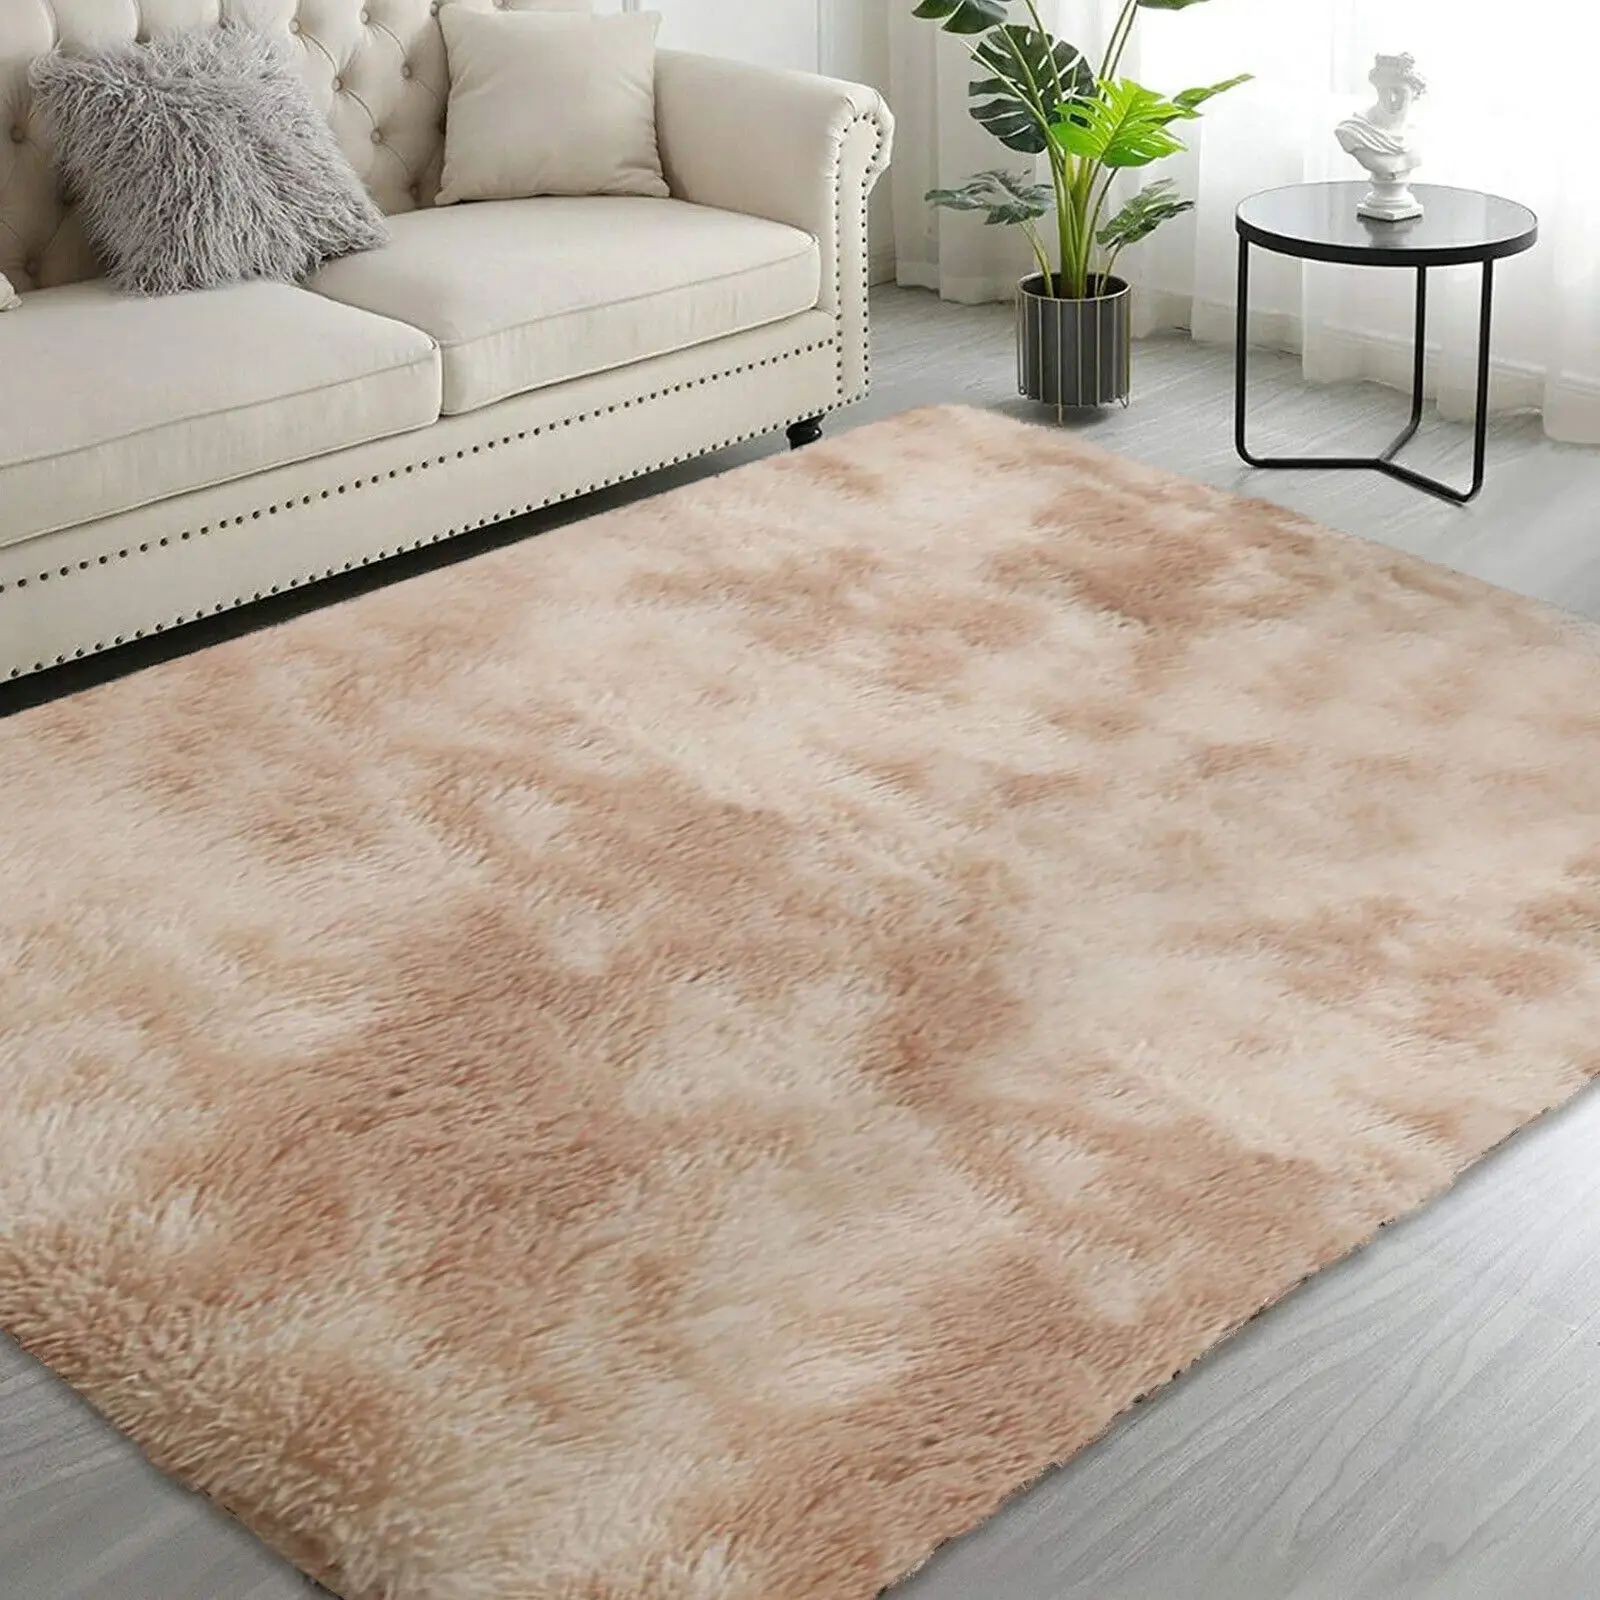 Shaggy Fluffy Faux Fur Area Rug Door Mat Tie Dye Shag Carpet Rugs for Bedroom Living Room Luxury Bed Side Plush Carpets